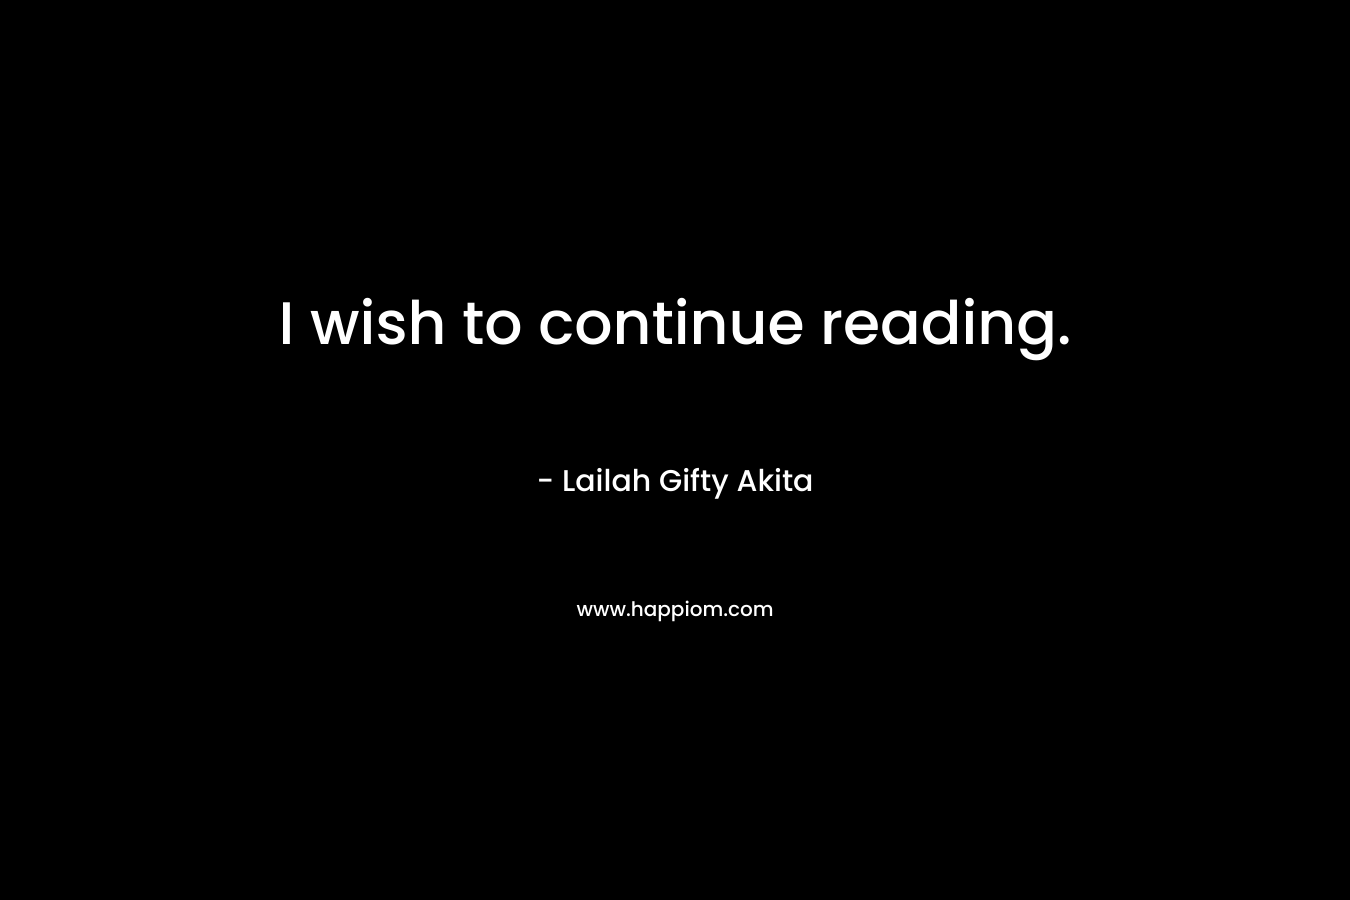 I wish to continue reading.